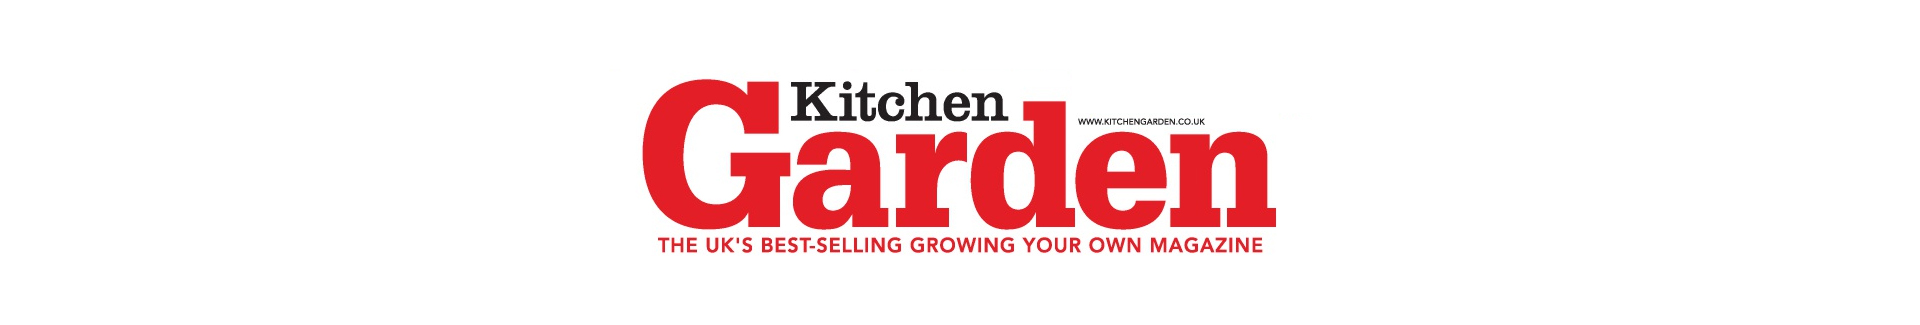 Kitchen Garden Magazine, the UK's best selling growing your own magazine.